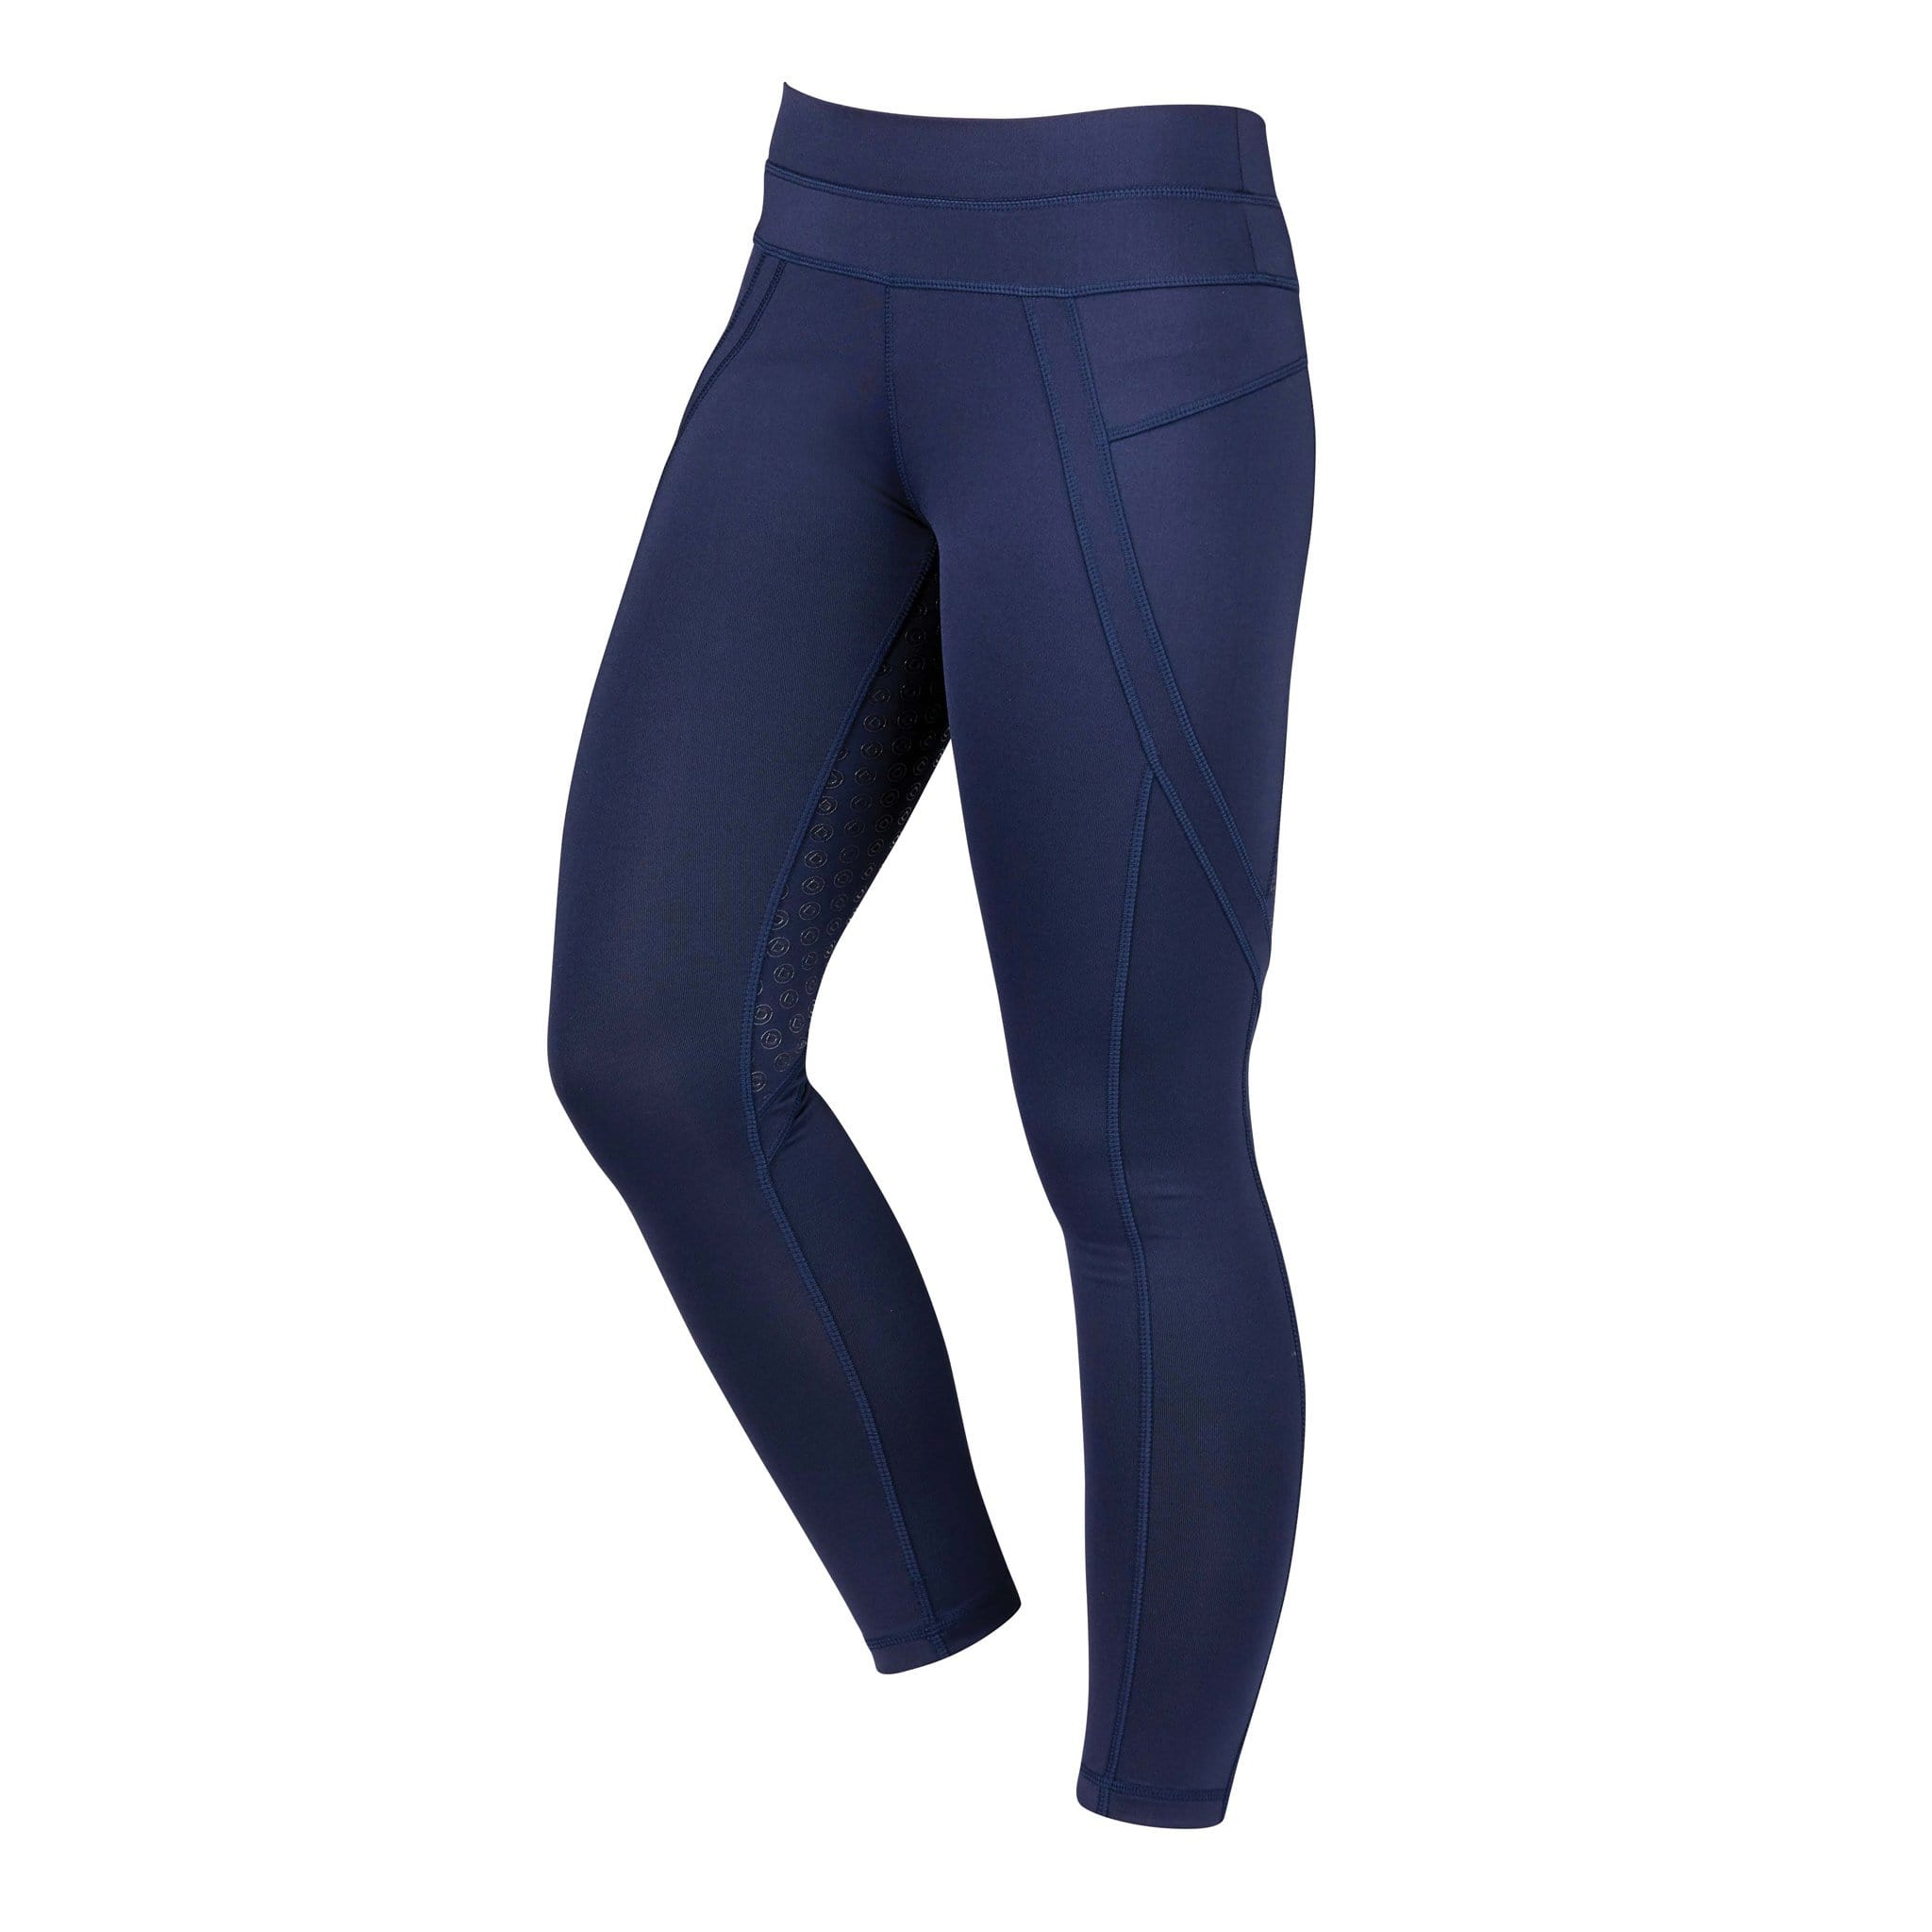 Horse Riding Leggings & Tights with Phone Pocket, FREE UK Delivery*